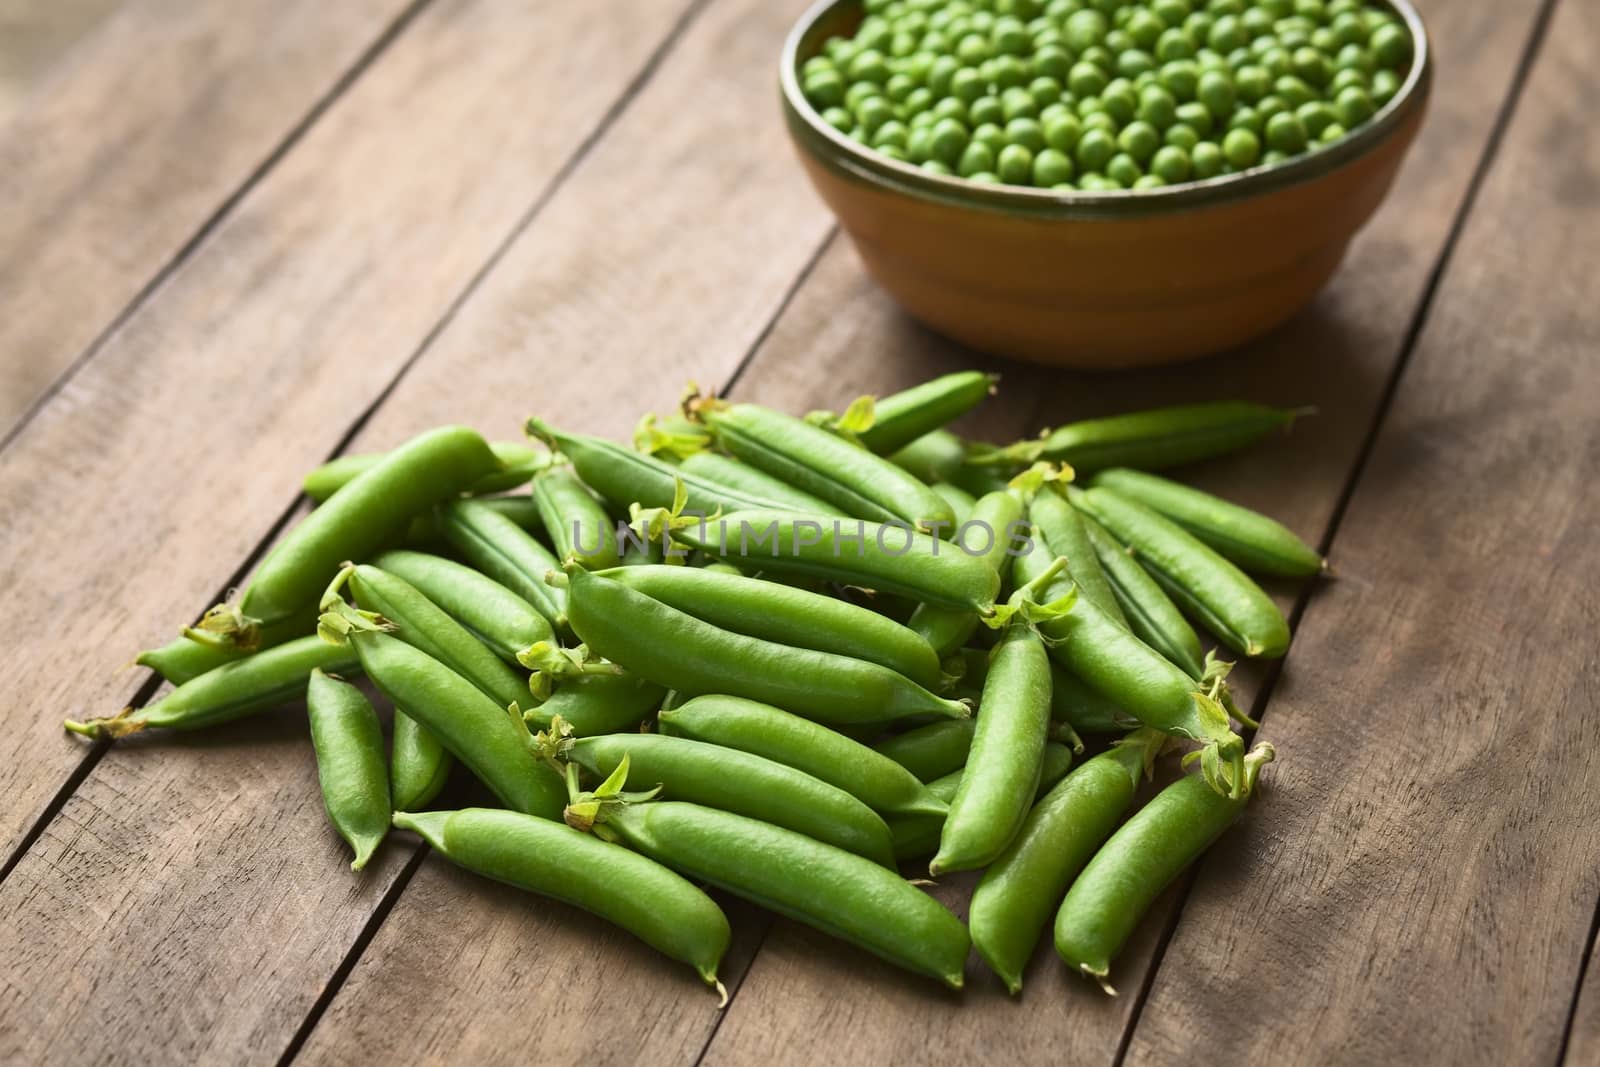 Peapods and Peas by ildi